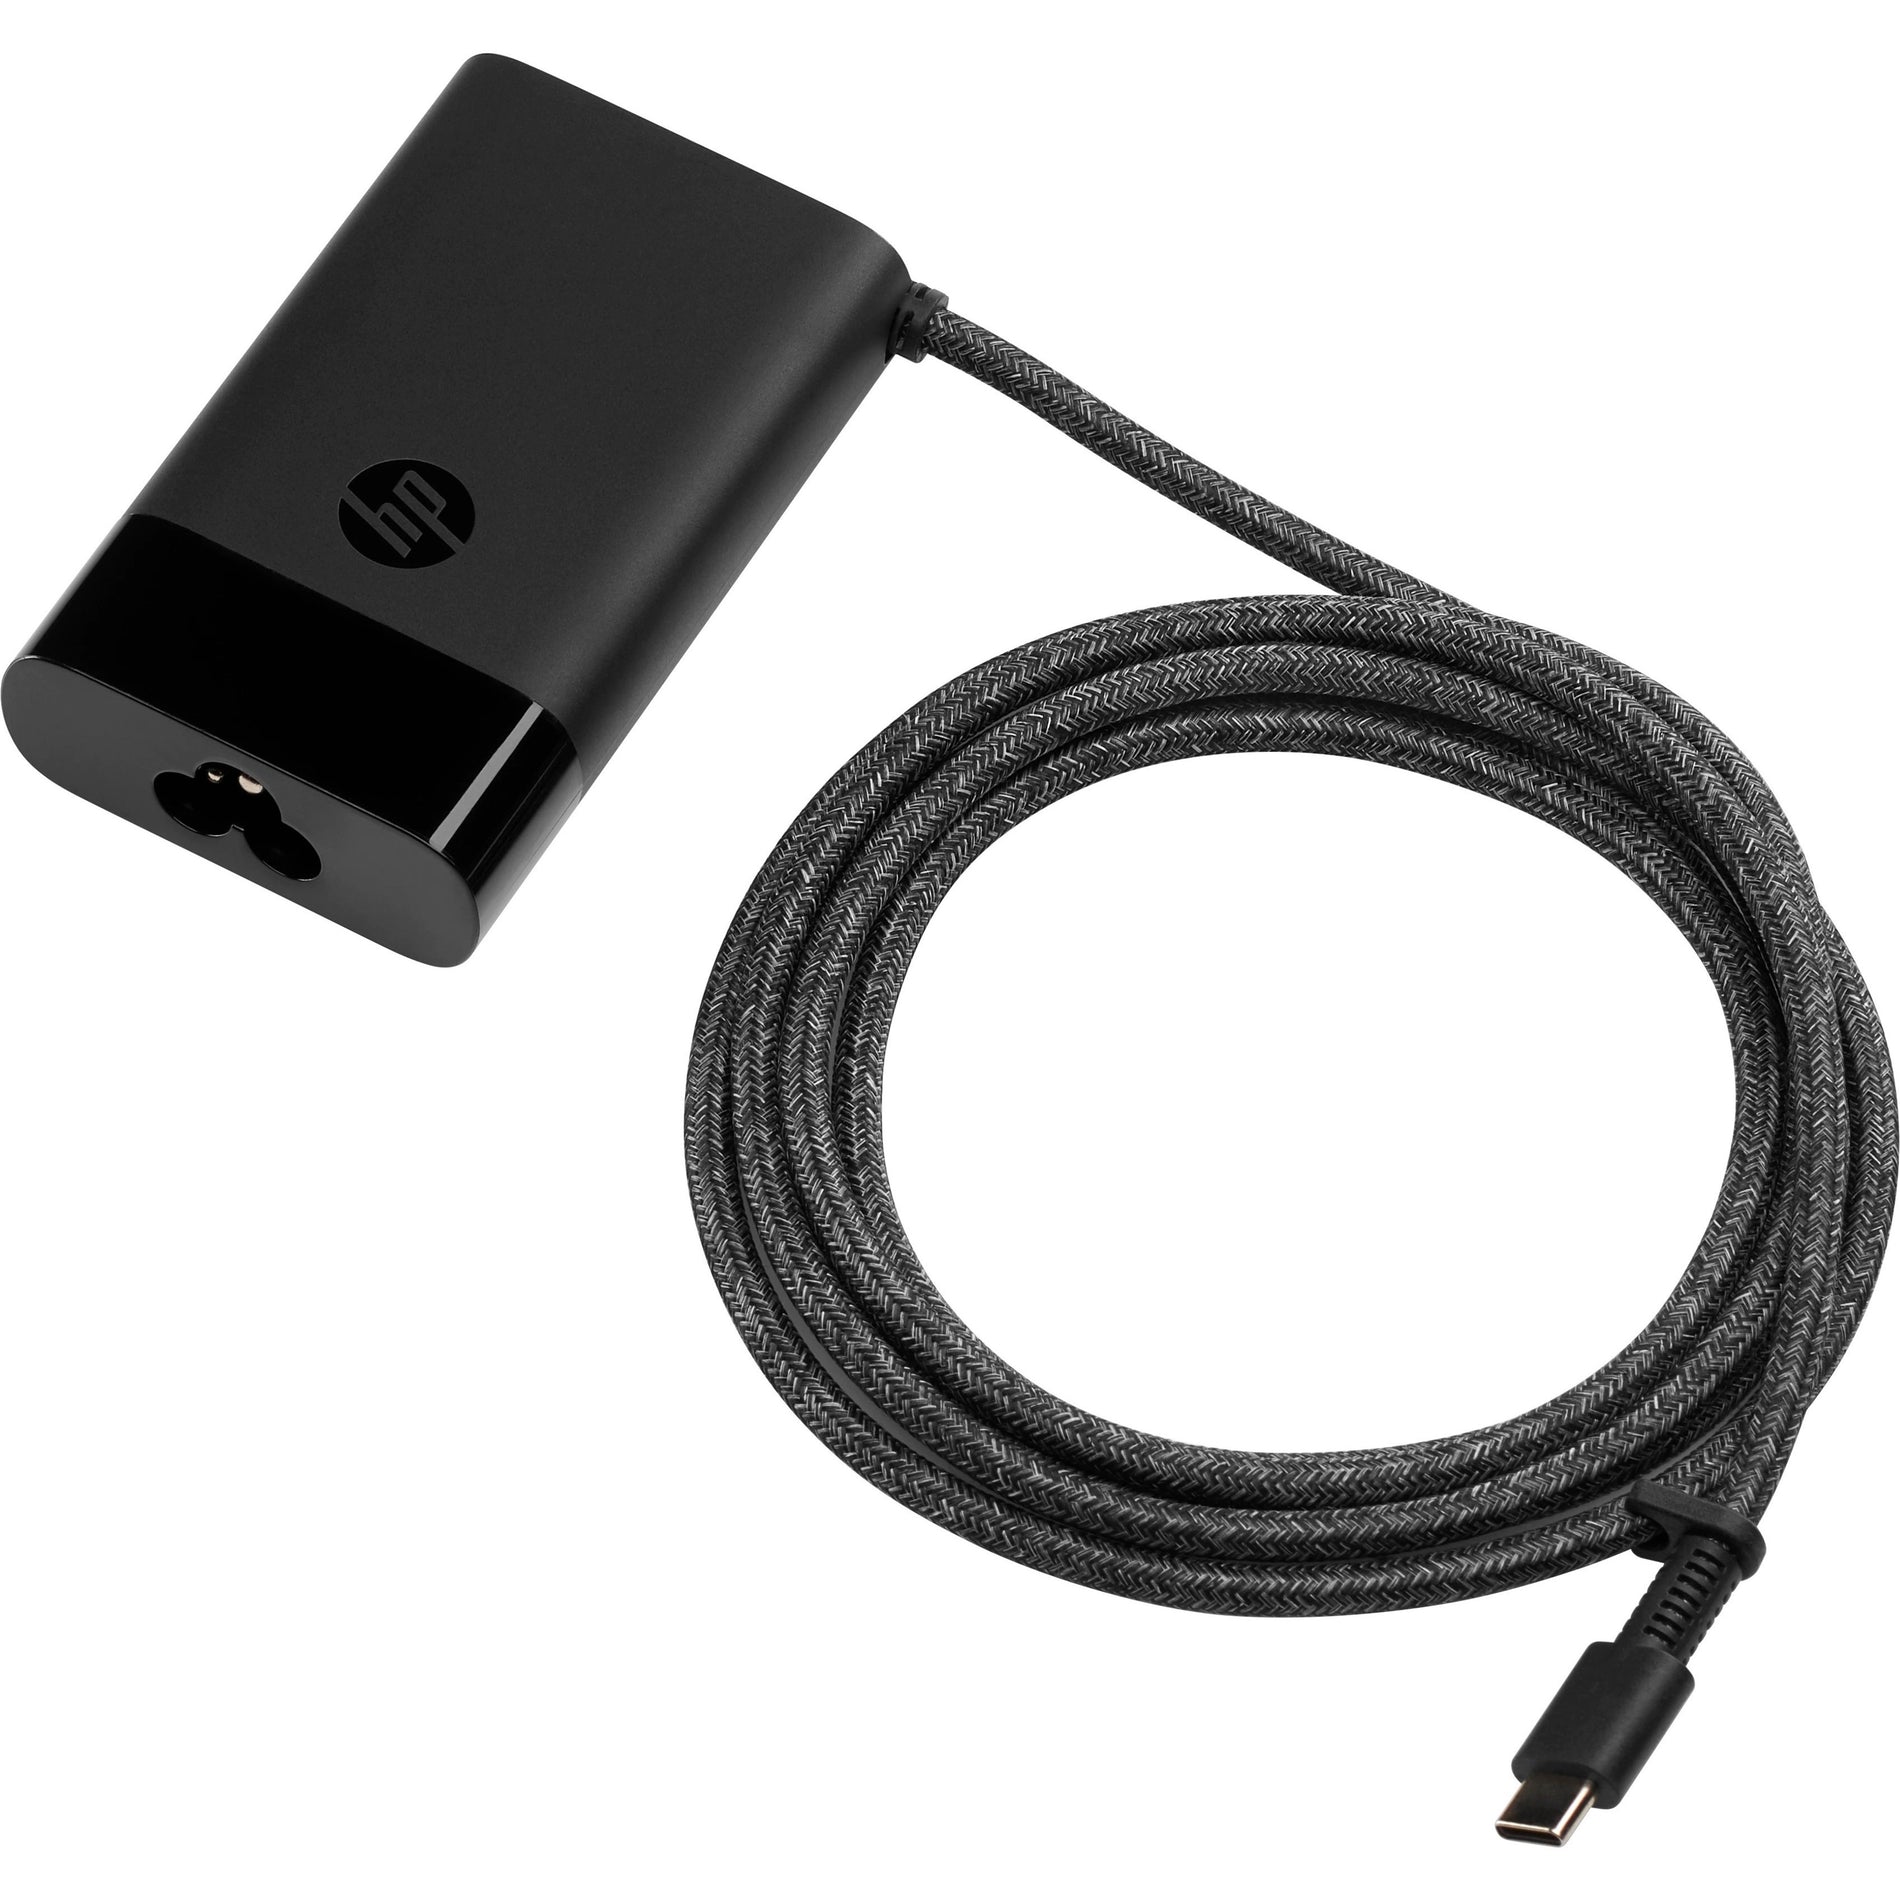 HP USB-C 65W Laptop Charger, Fast Charging Power Adapter for Tablets, Smartphones, and Notebooks